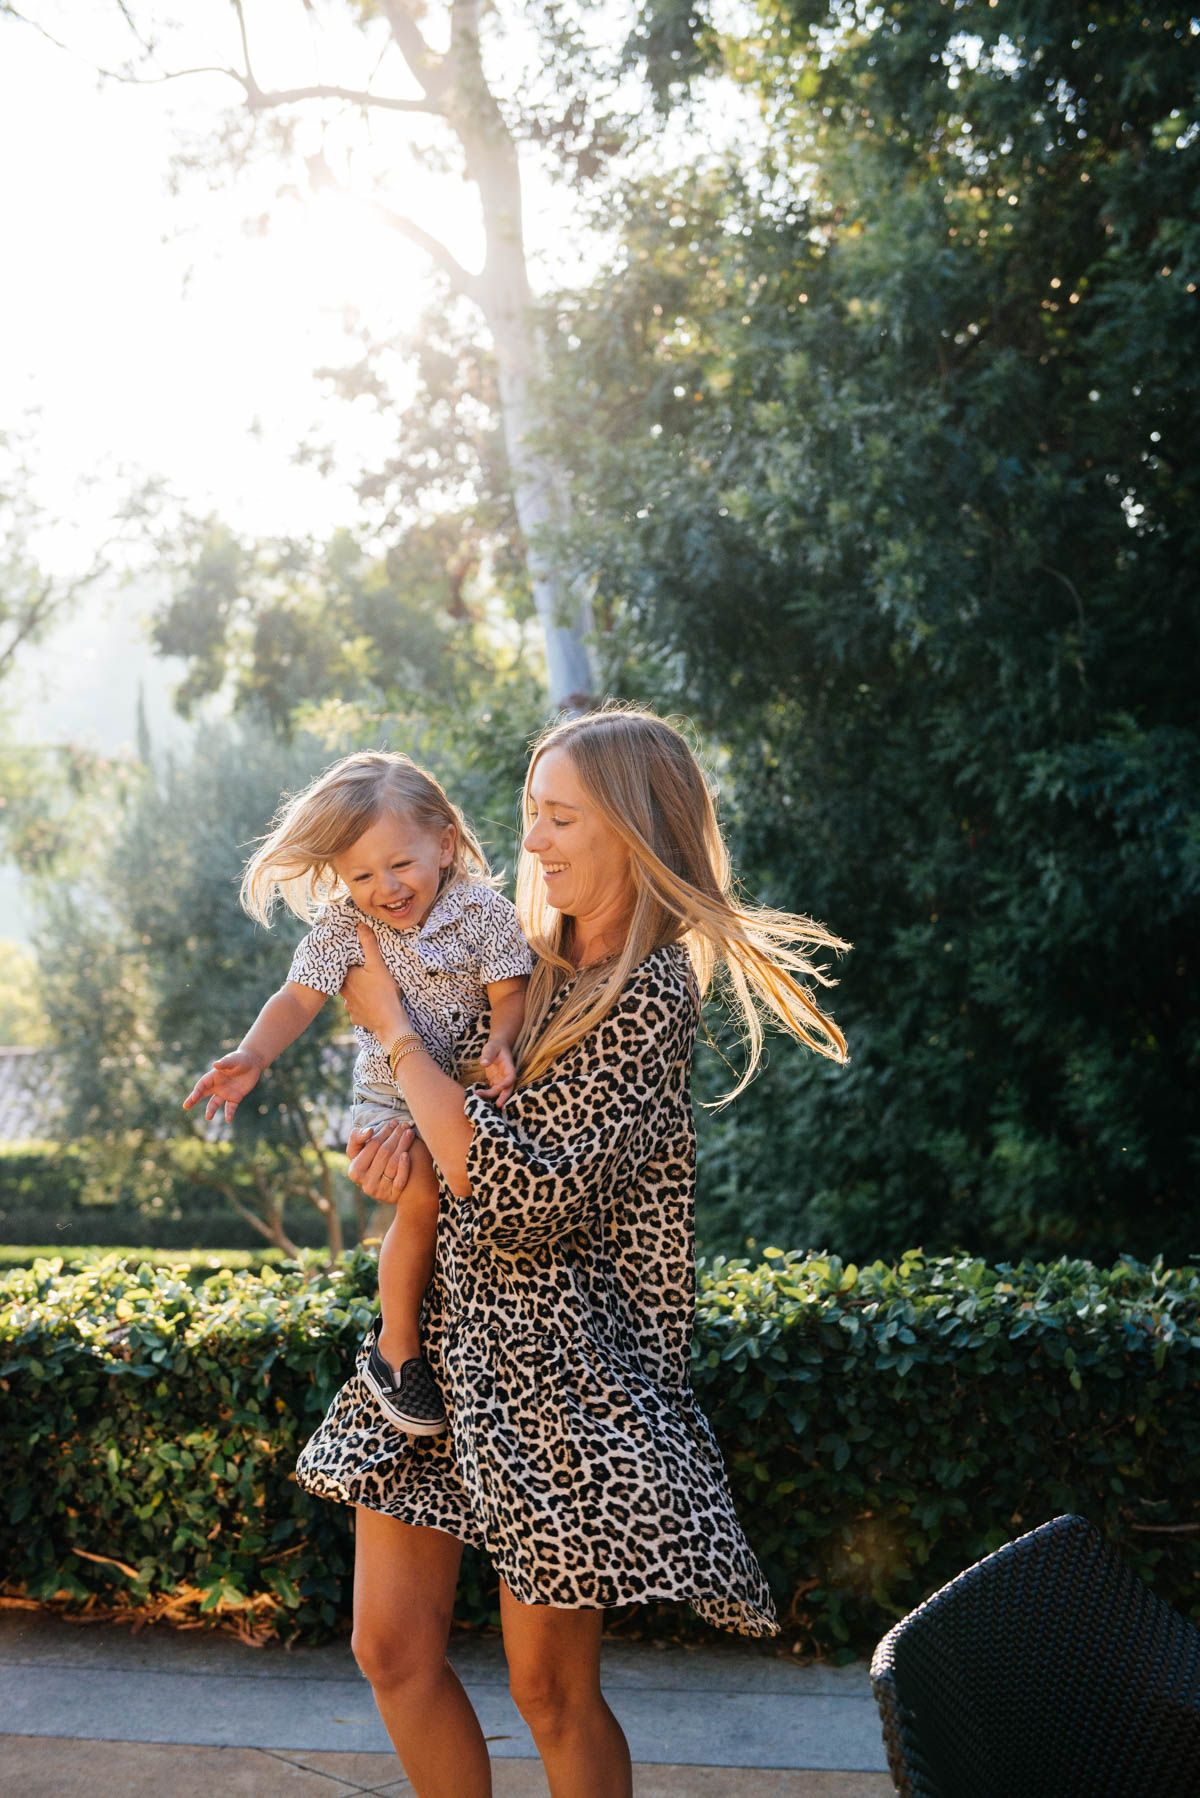 eatsleepwear goes on a family trip with toddler to Rancho Bernardo Inn showing mother and son